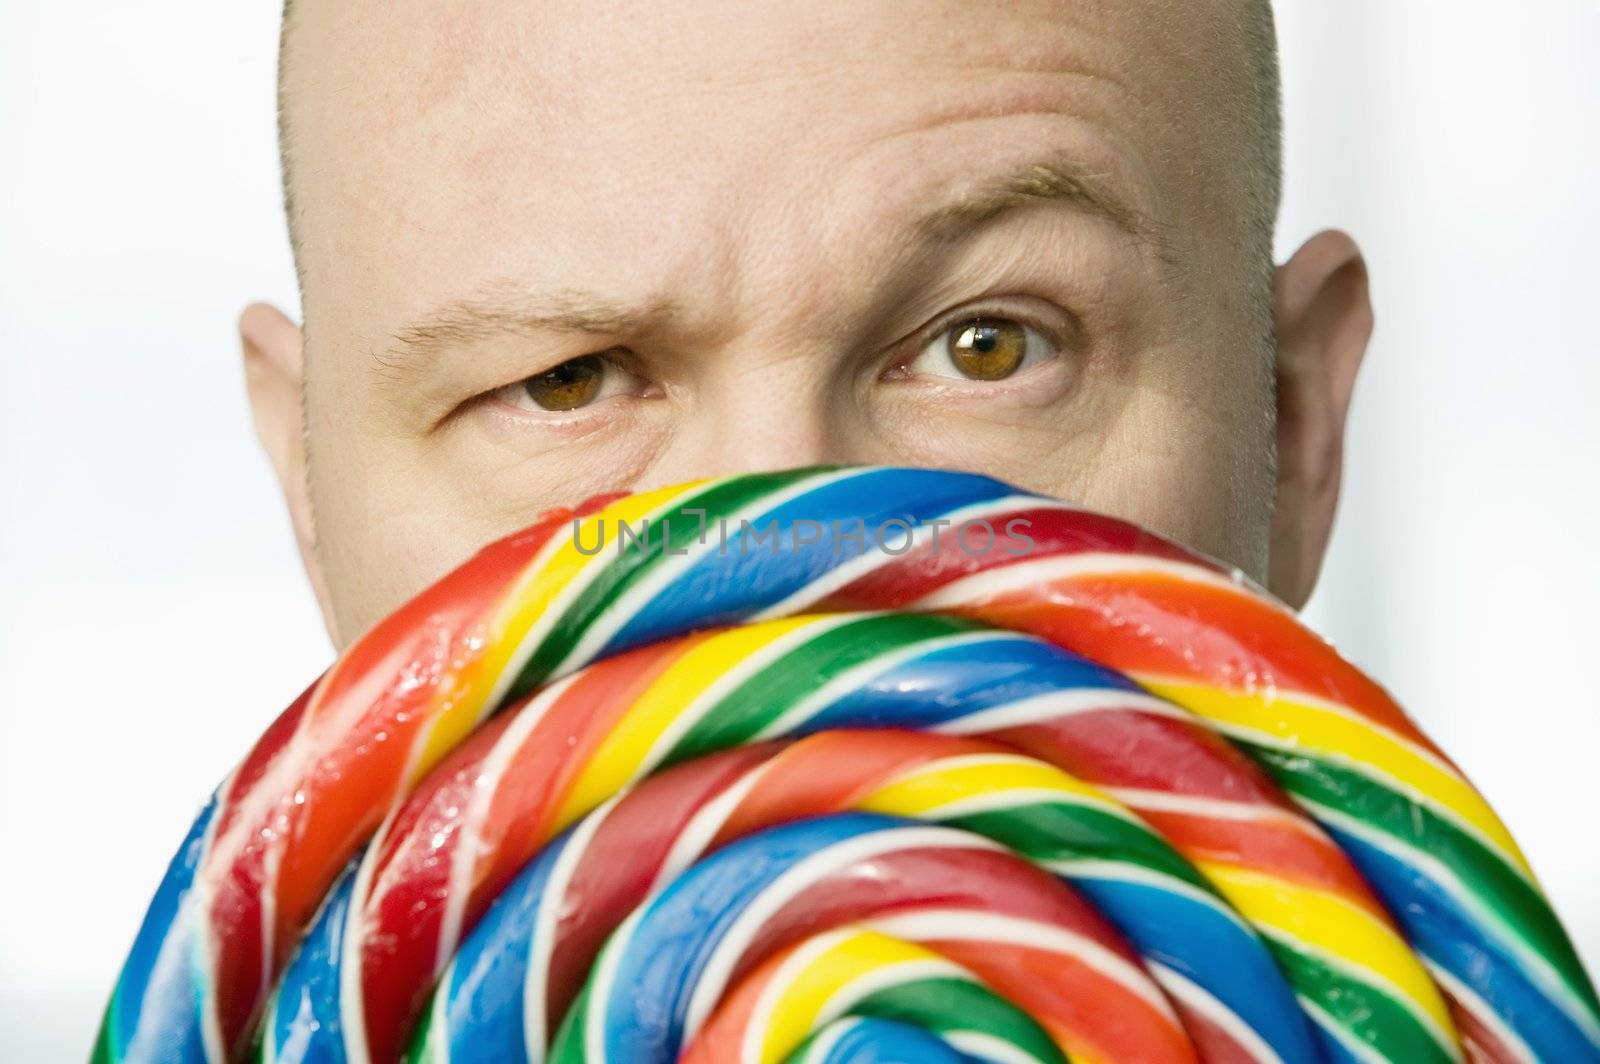 Man Peeking Out From Behind A Lollipop by Creatista